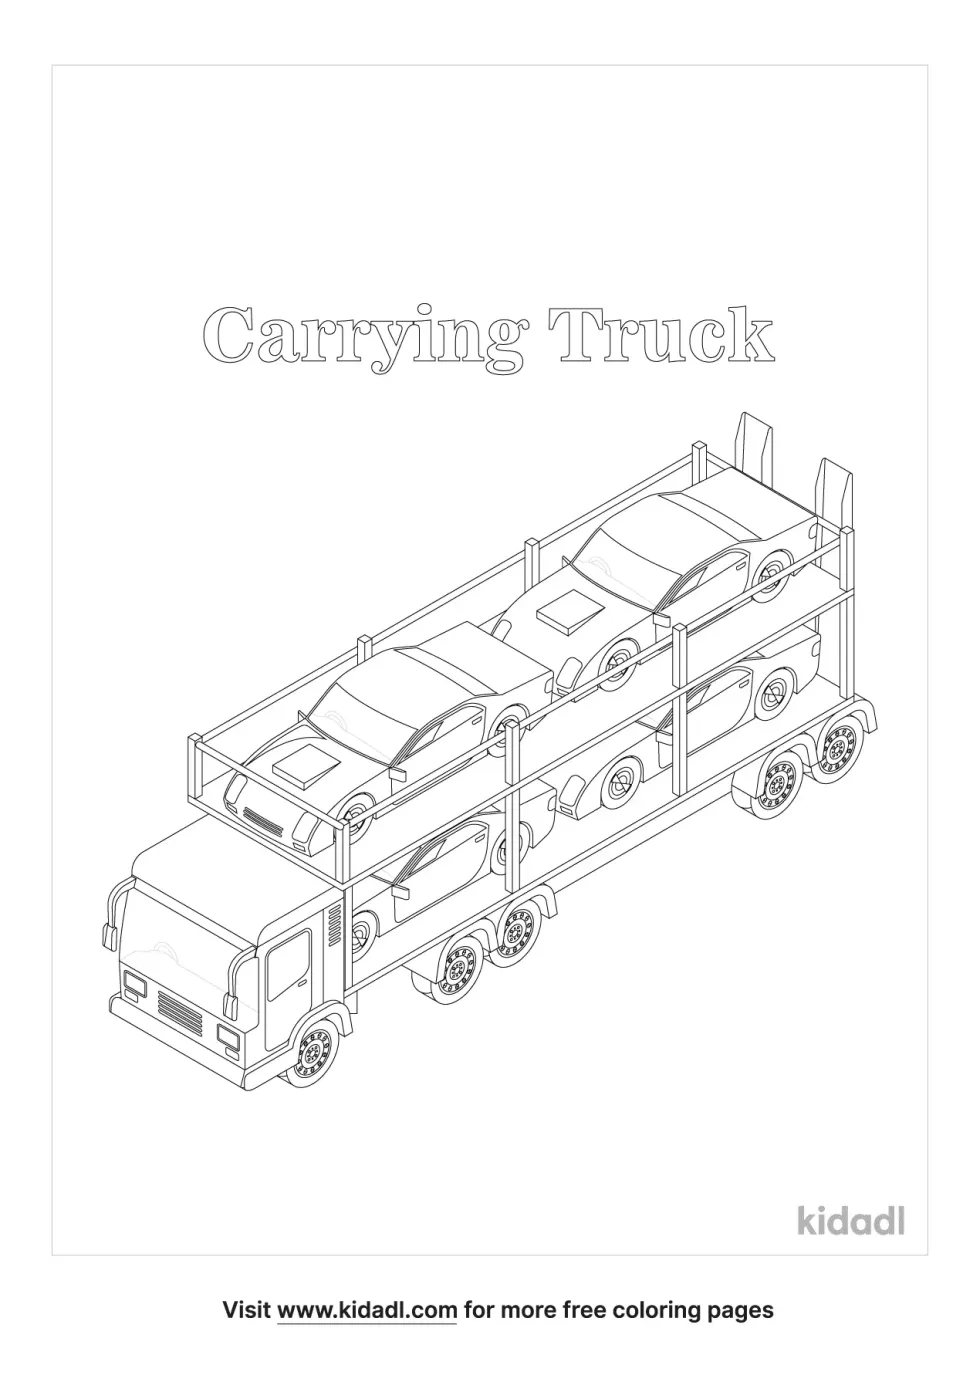 Carrying Truck Coloring Page